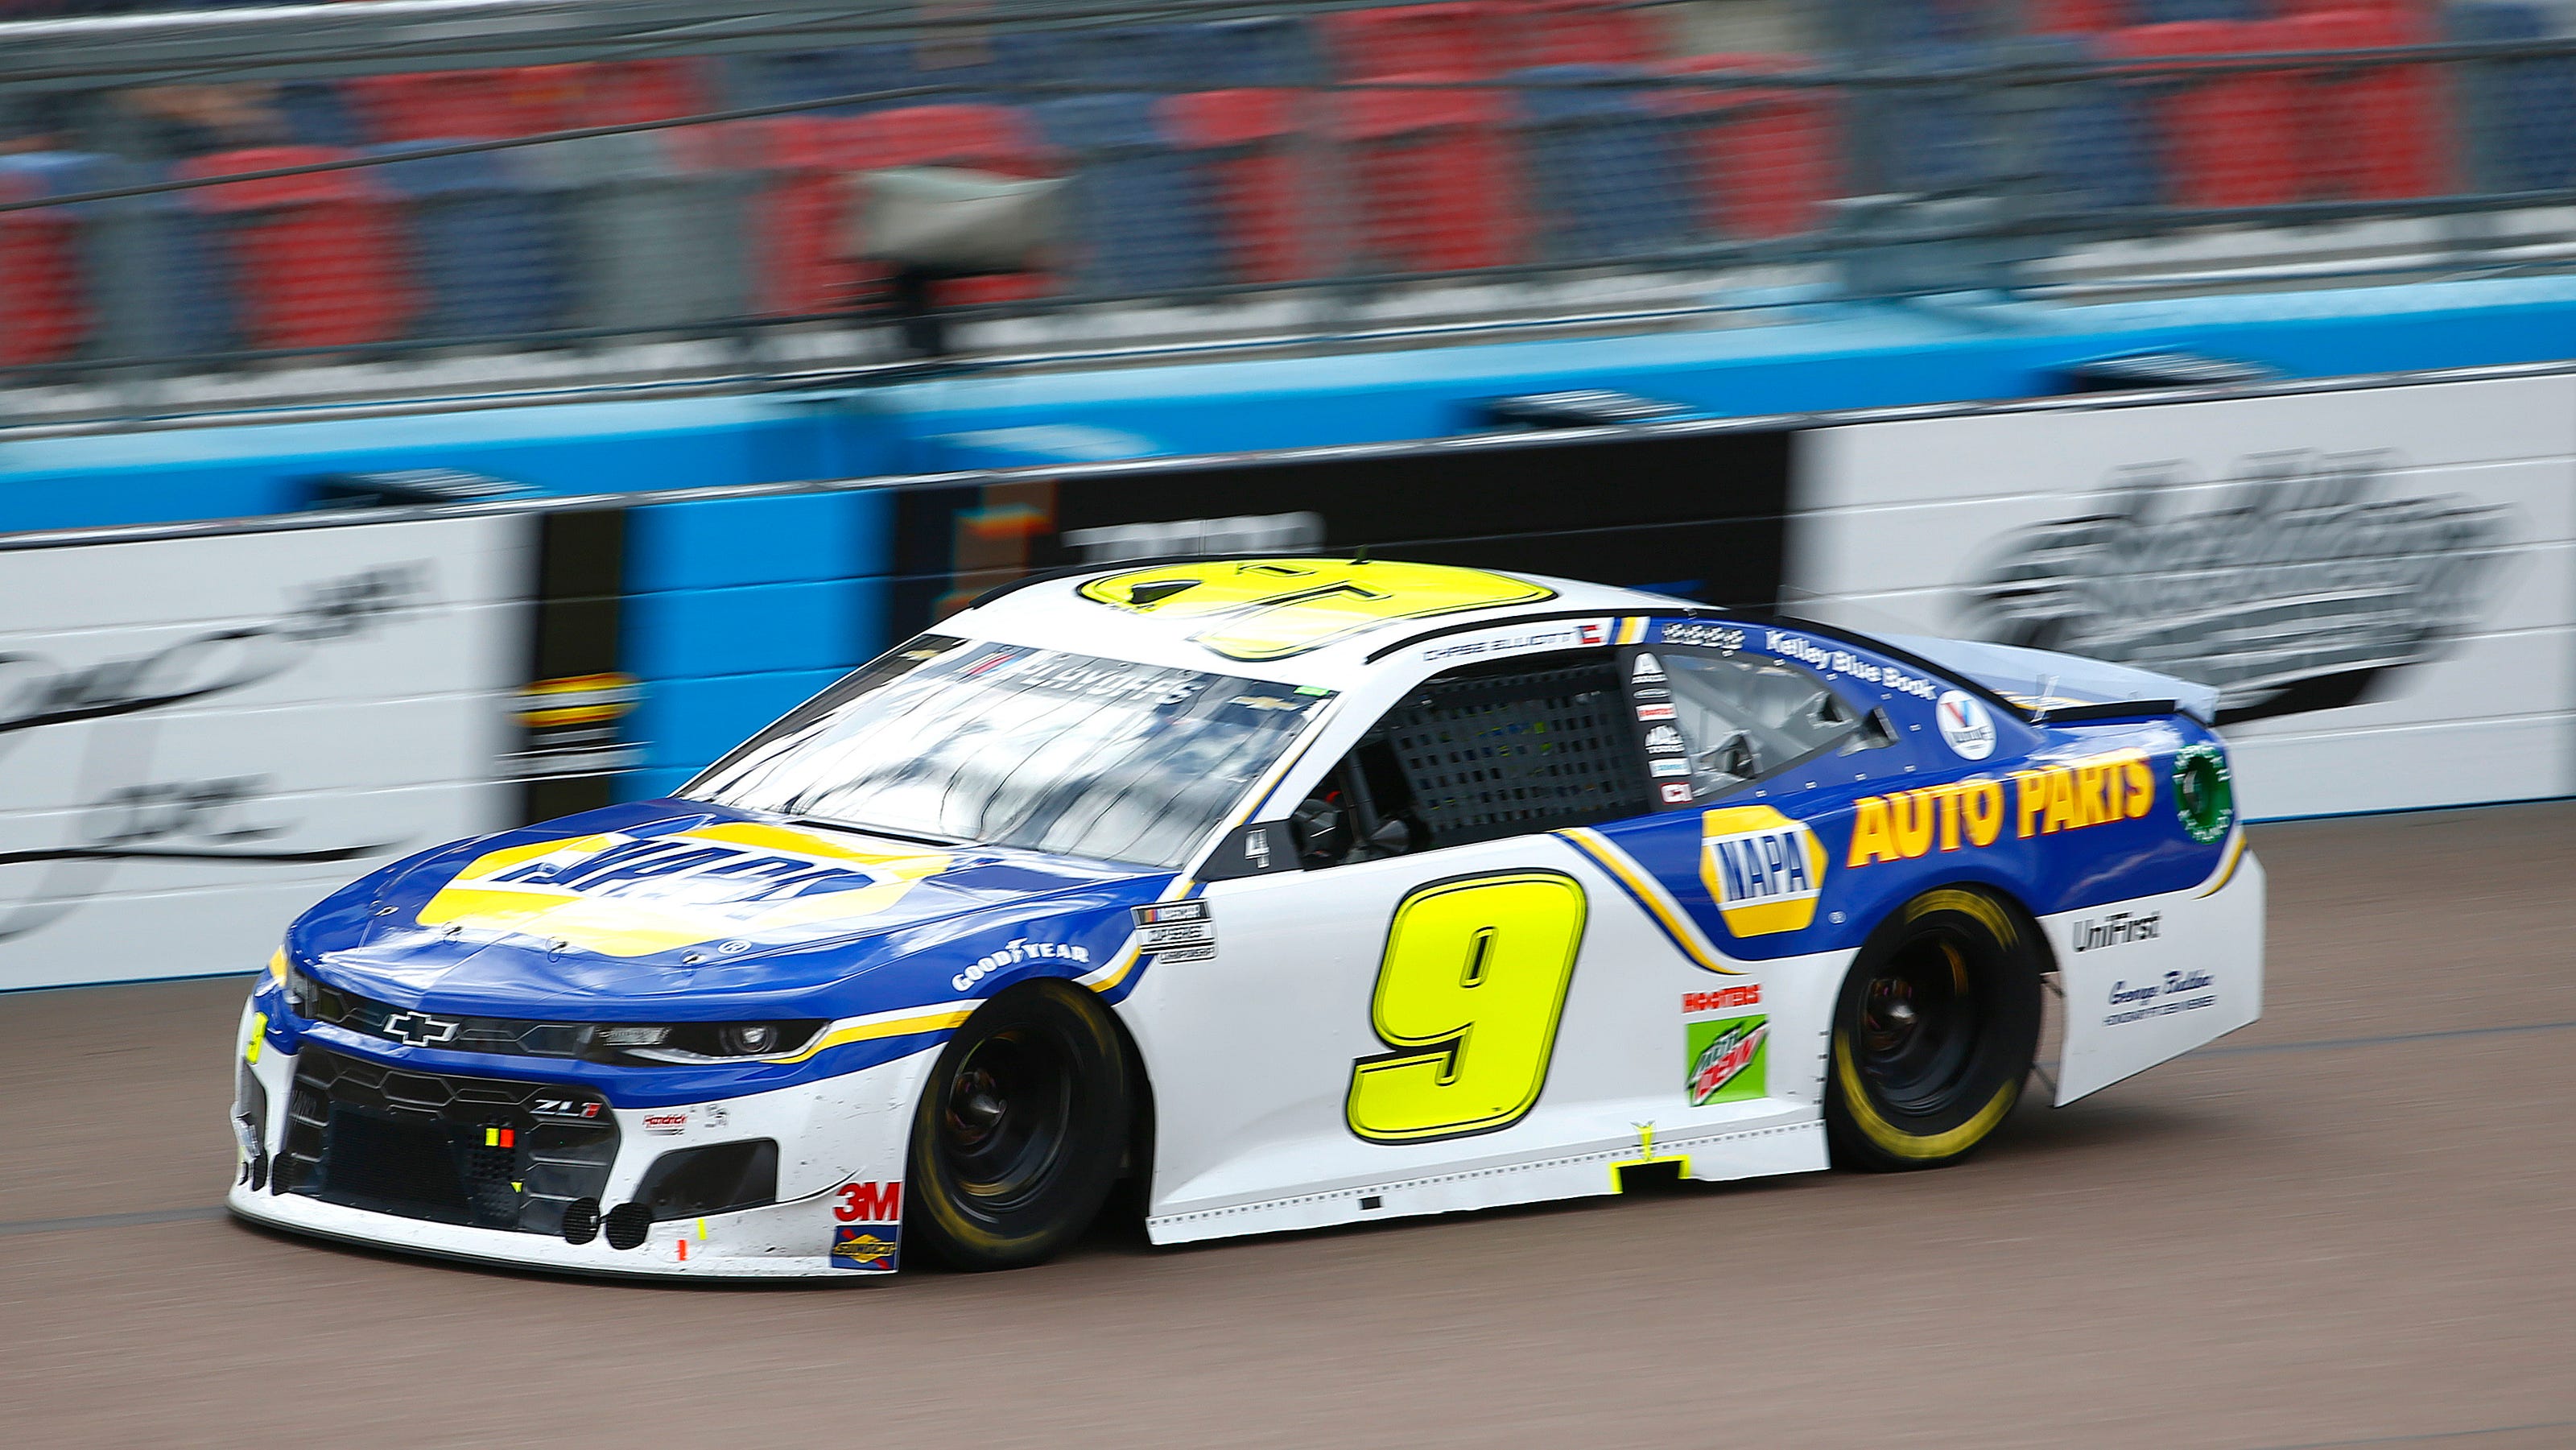 Chase Elliott races from back of field to 1st NASCAR Cup Series title